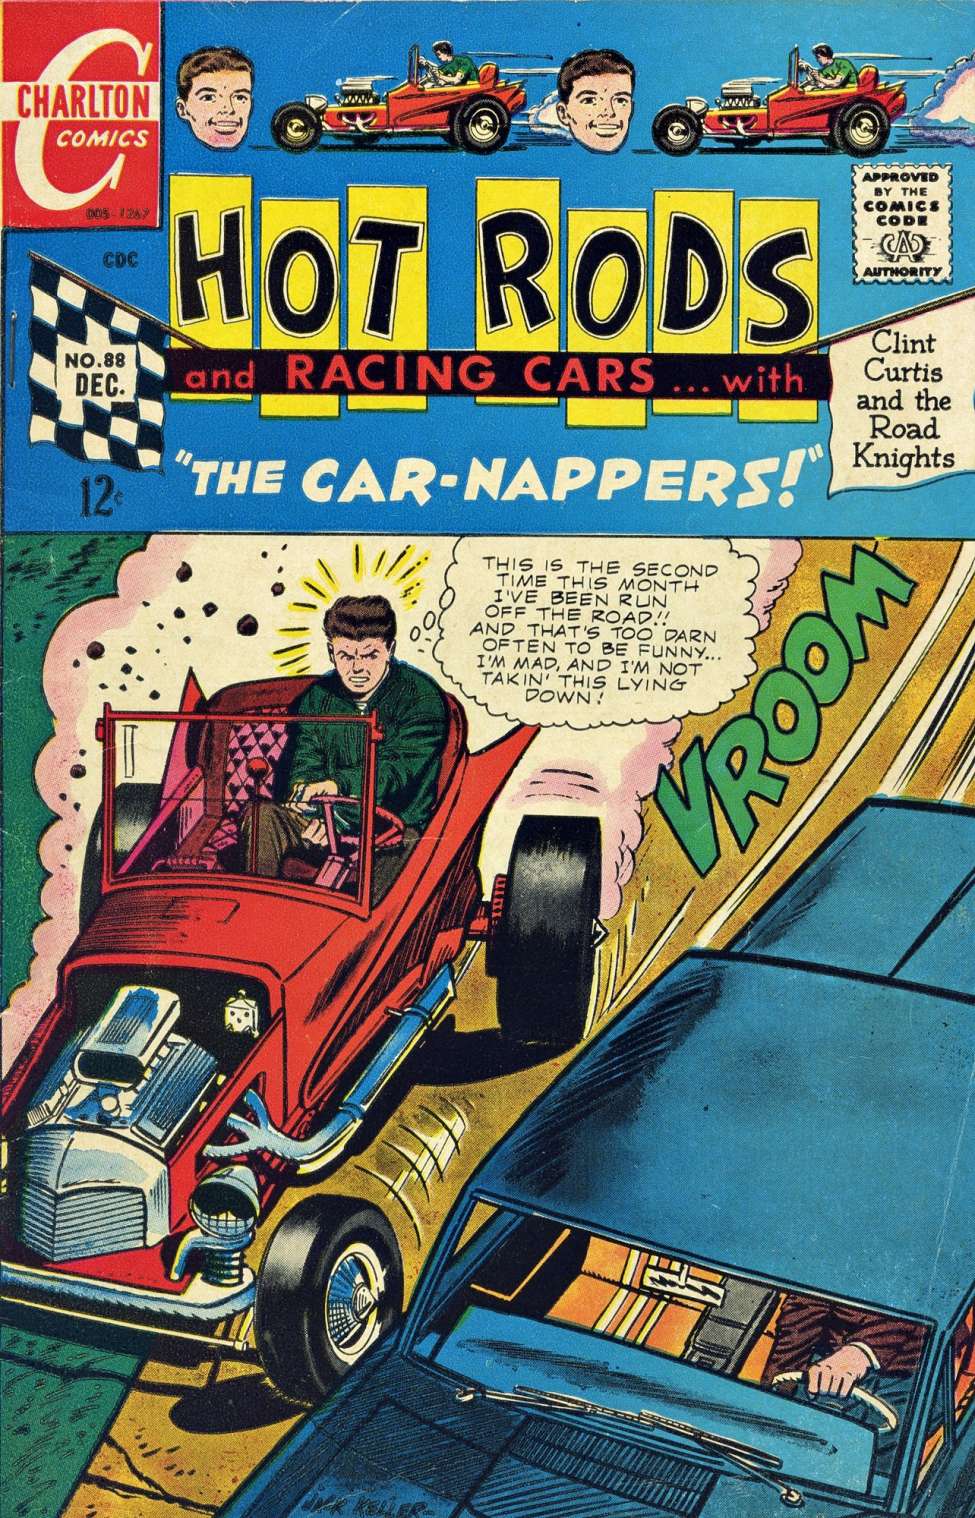 Book Cover For Hot Rods and Racing Cars 88